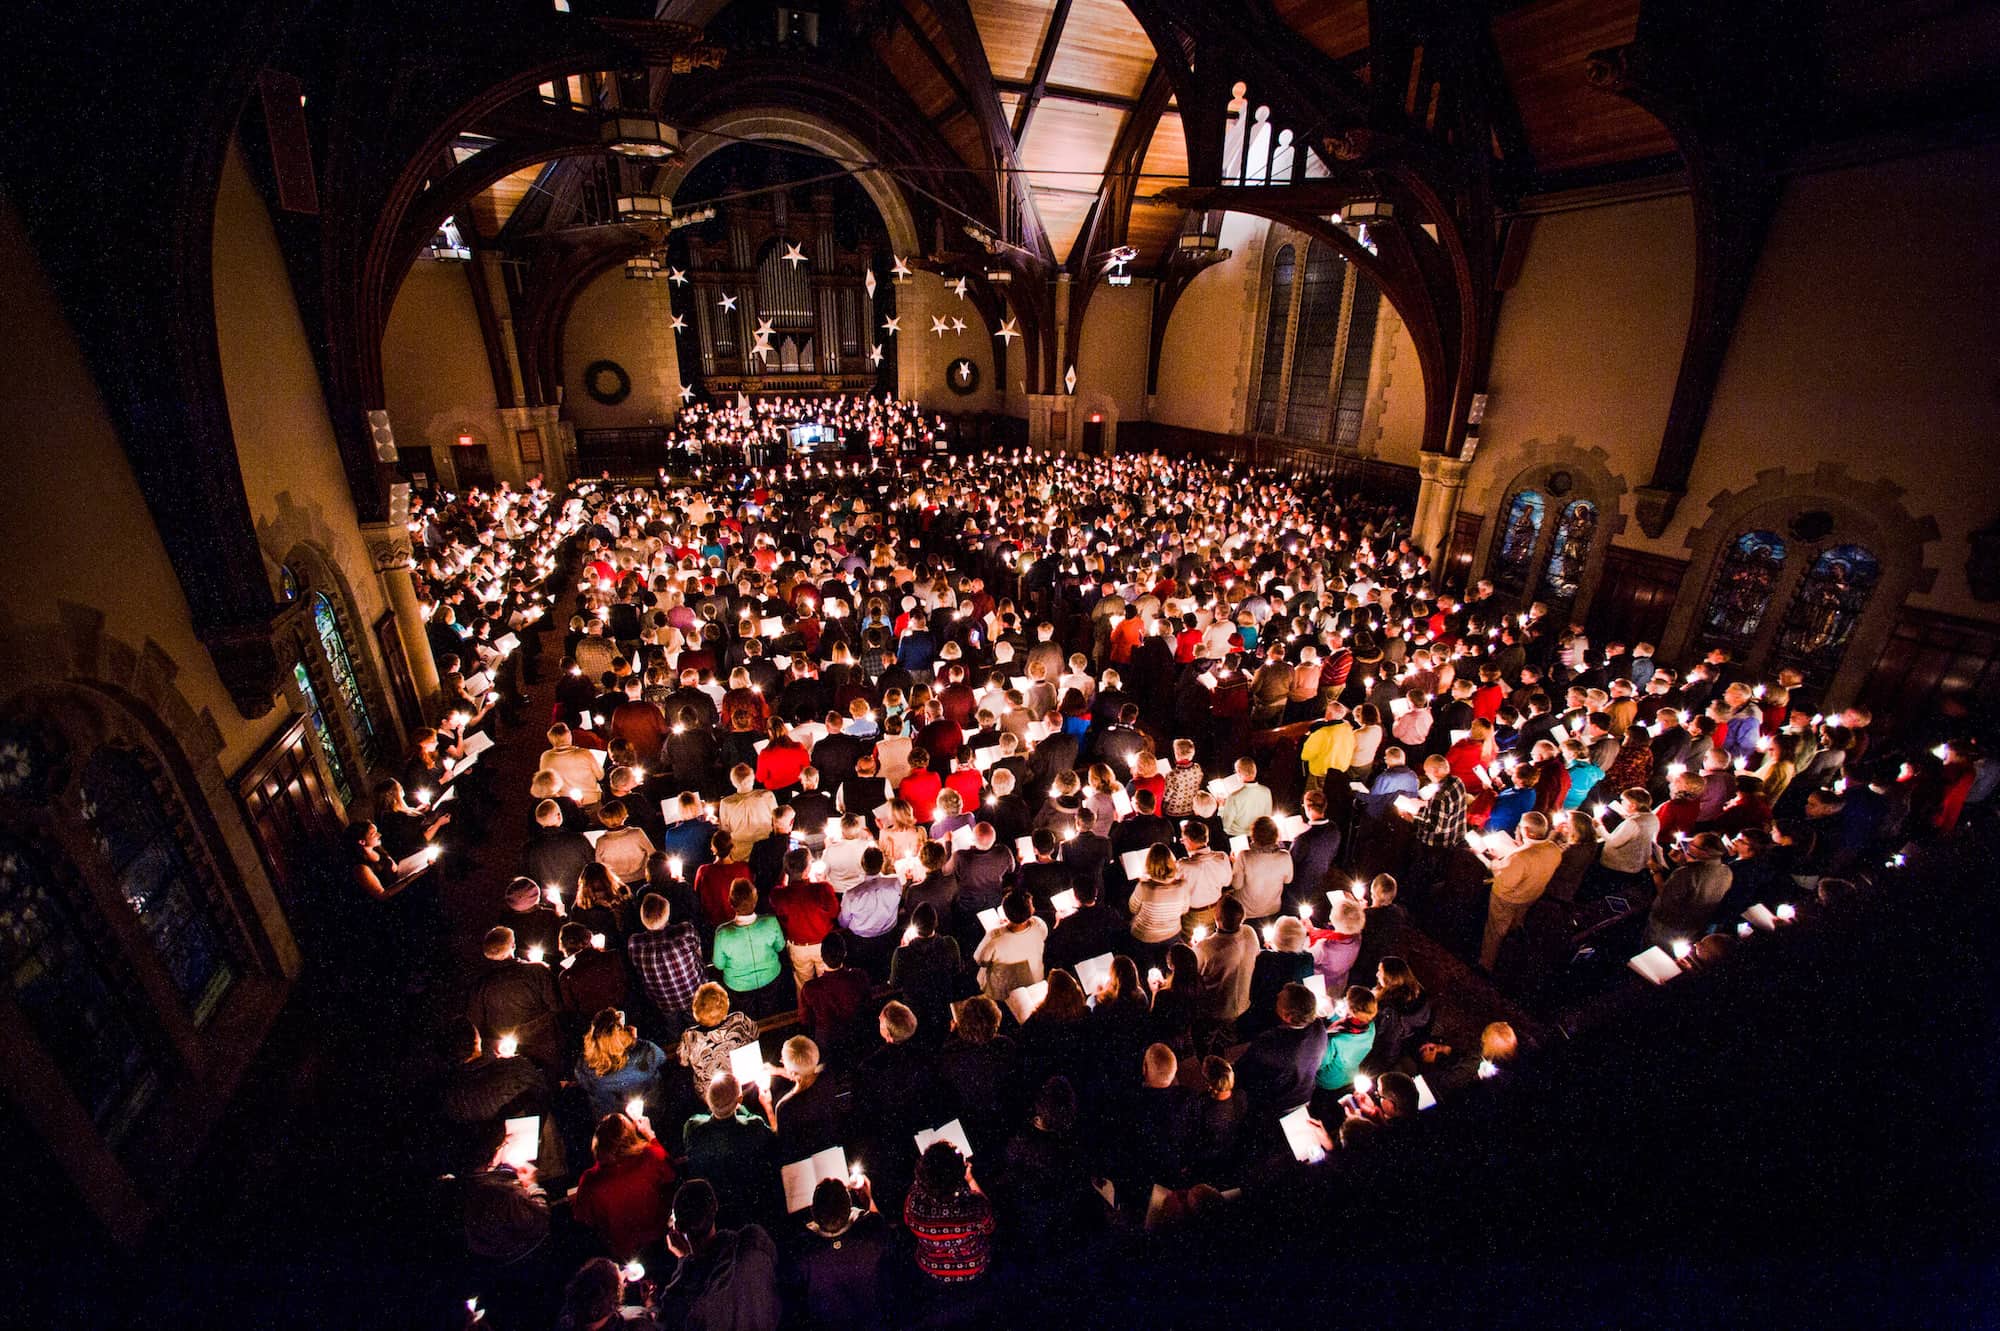 A large group of people seated inside a spacious church. Each person is holding a lit candle. The church’s gothic architecture is highlighted by the candlelight, revealing arched ceilings, wooden beams, and intricate designs.